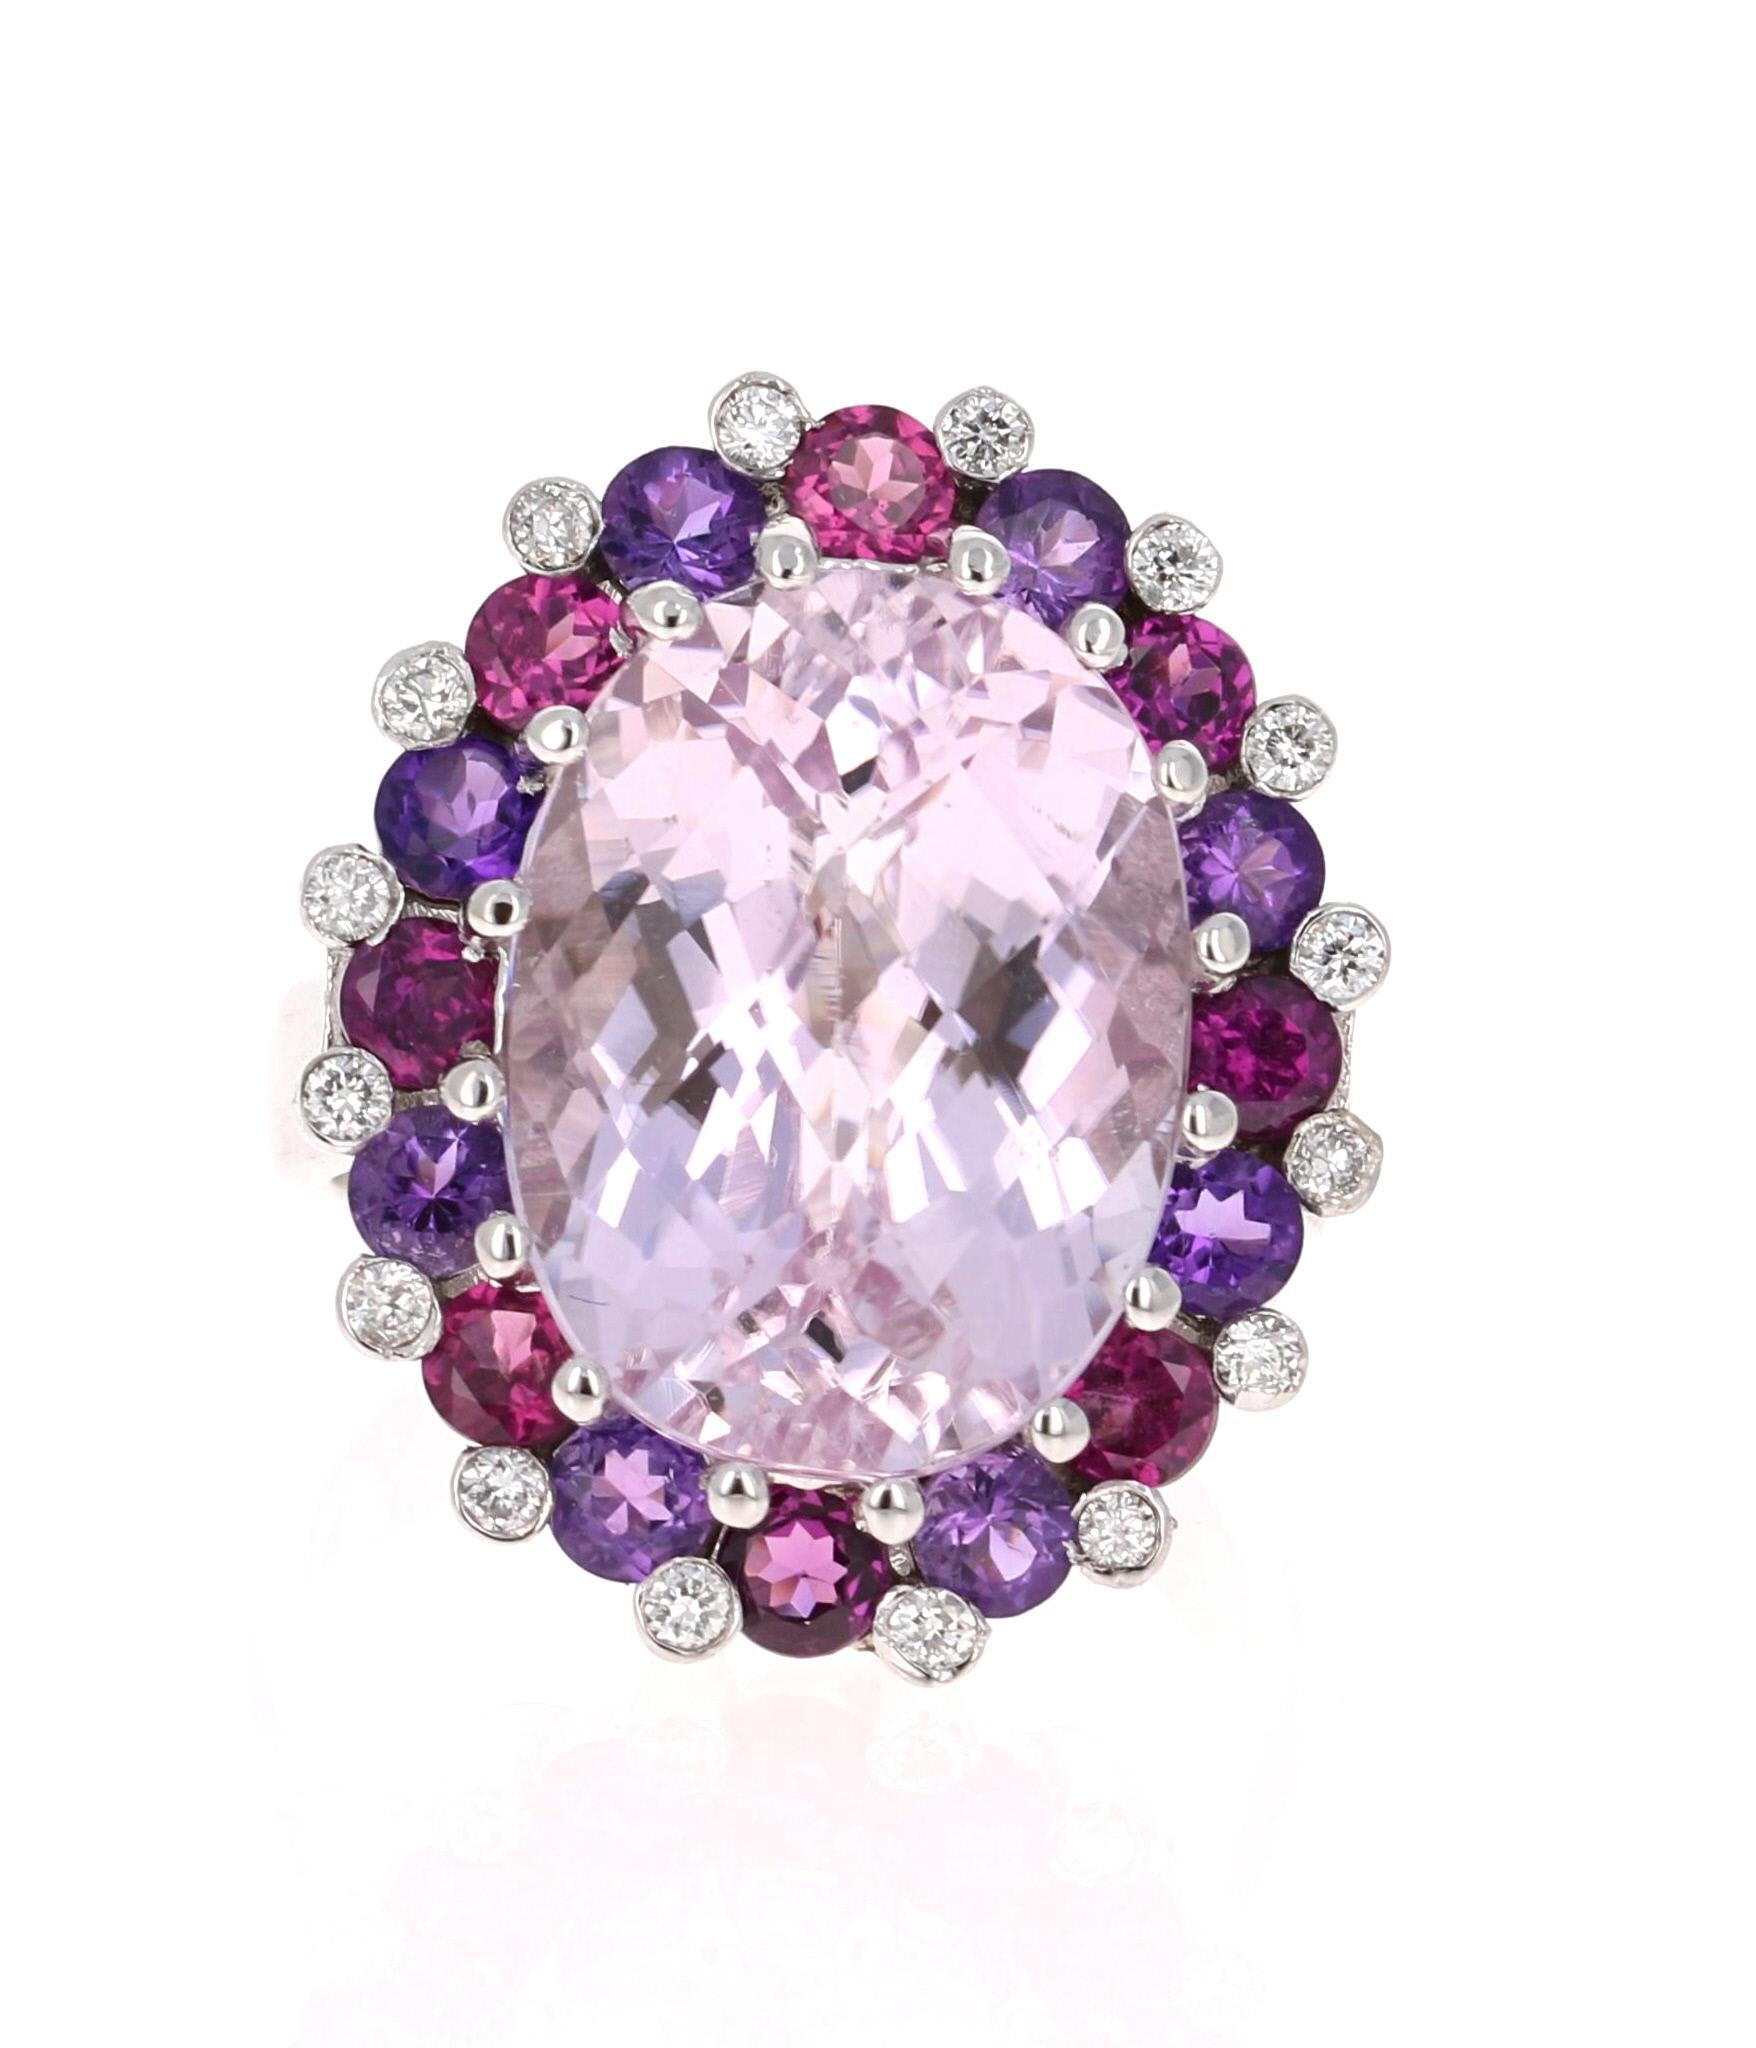 Super gorgeous and uniquely designed 13.00 Carat Kunzite, Amethyst, Purple Garnet and Diamond 14K Yellow Gold Cocktail Ring!

This ring has a large 10.85 carat Oval Cut Pinkish-Mauve Kunzite and is elegantly surrounded by alternating Round Cut